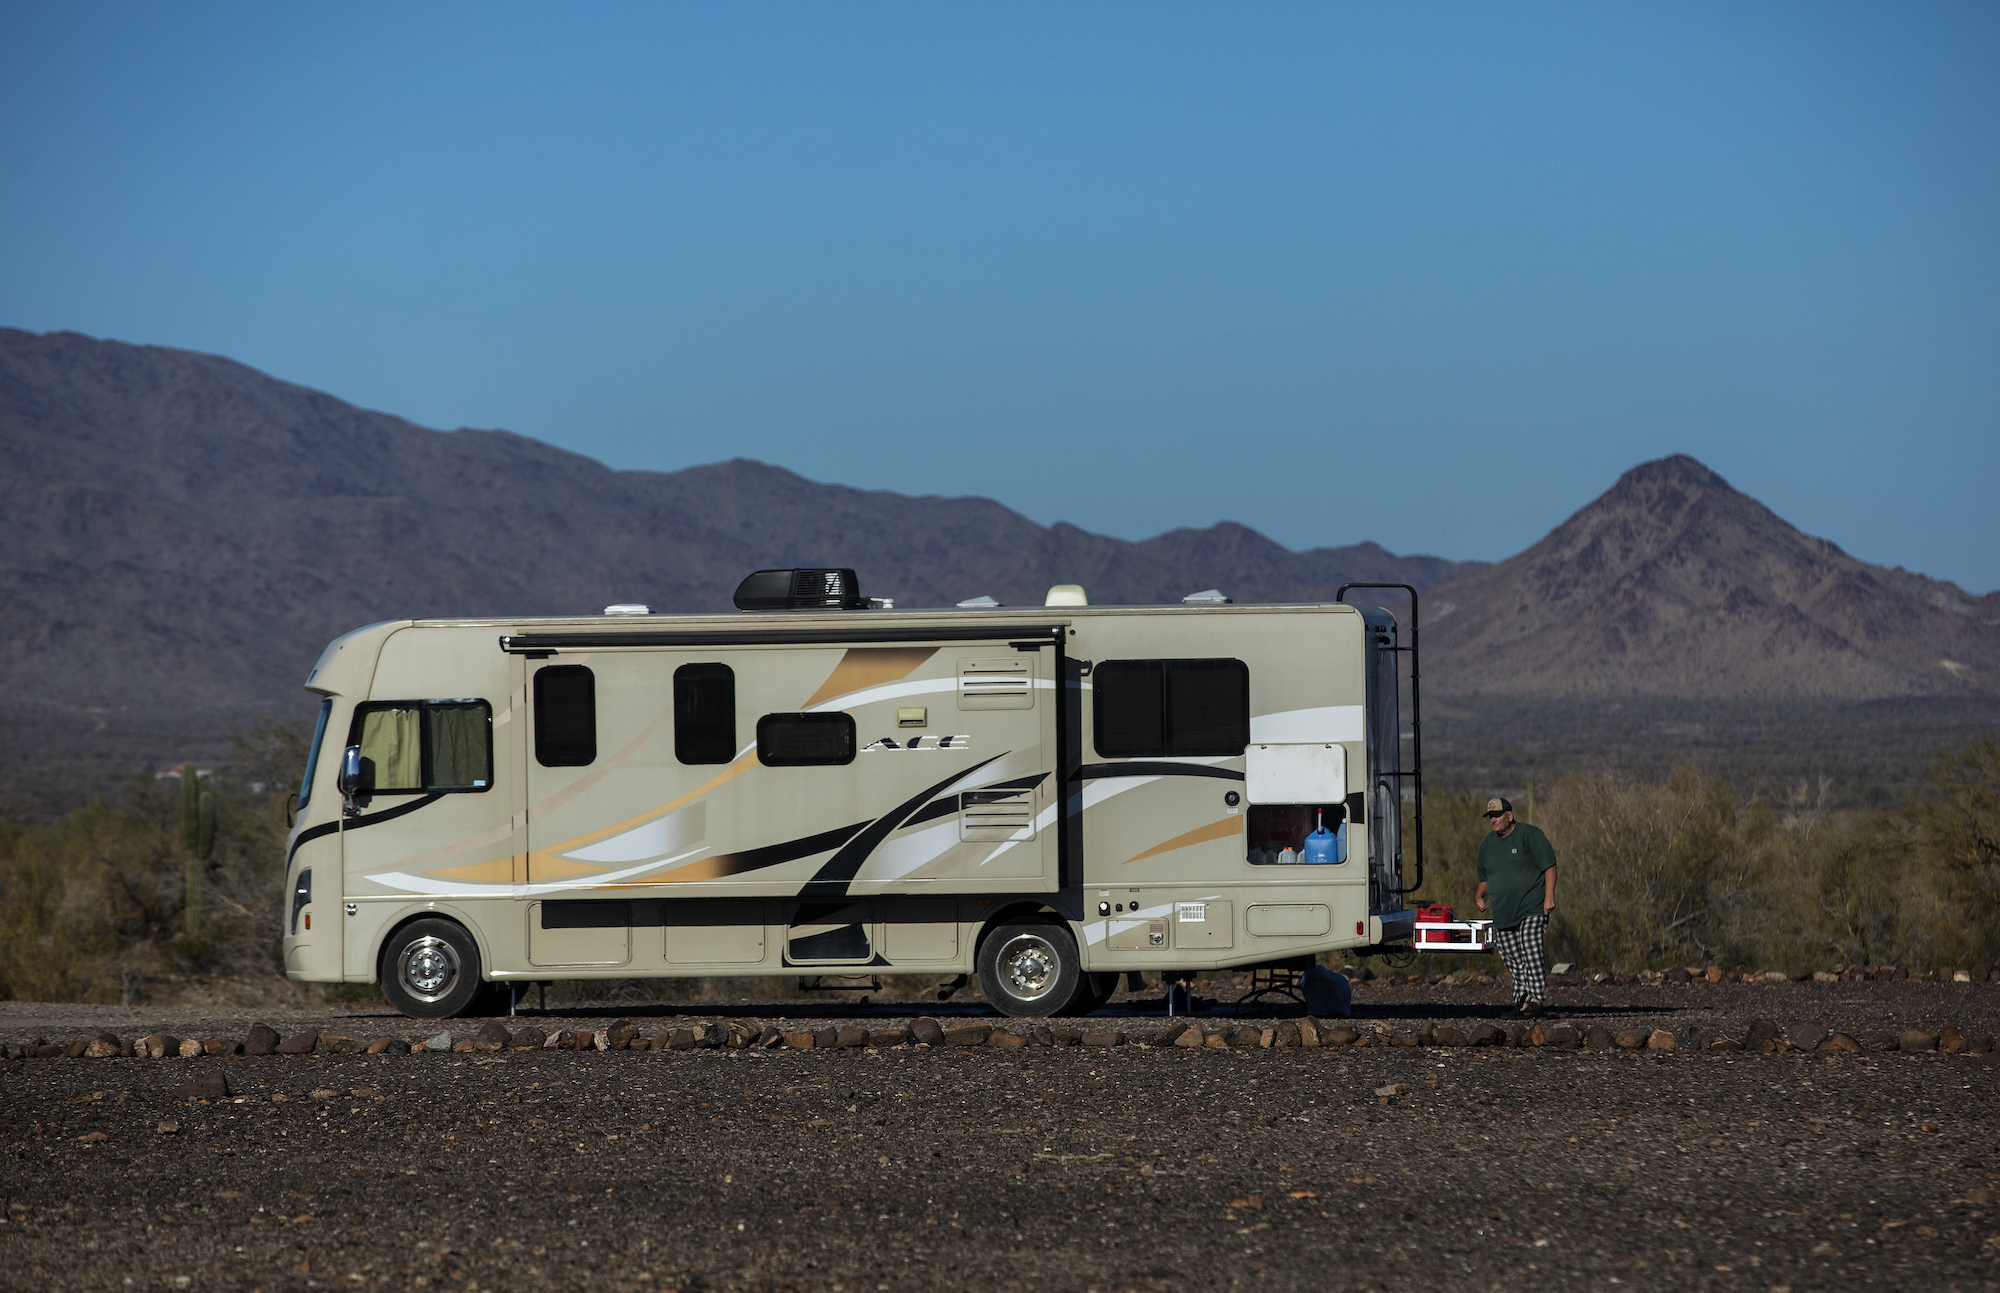 Paul Ostrom, age 67, of Sandpoint, Idaho, walks outside his RV, parked at the La Posa long-term visitor area in Quartzsite, Arizona